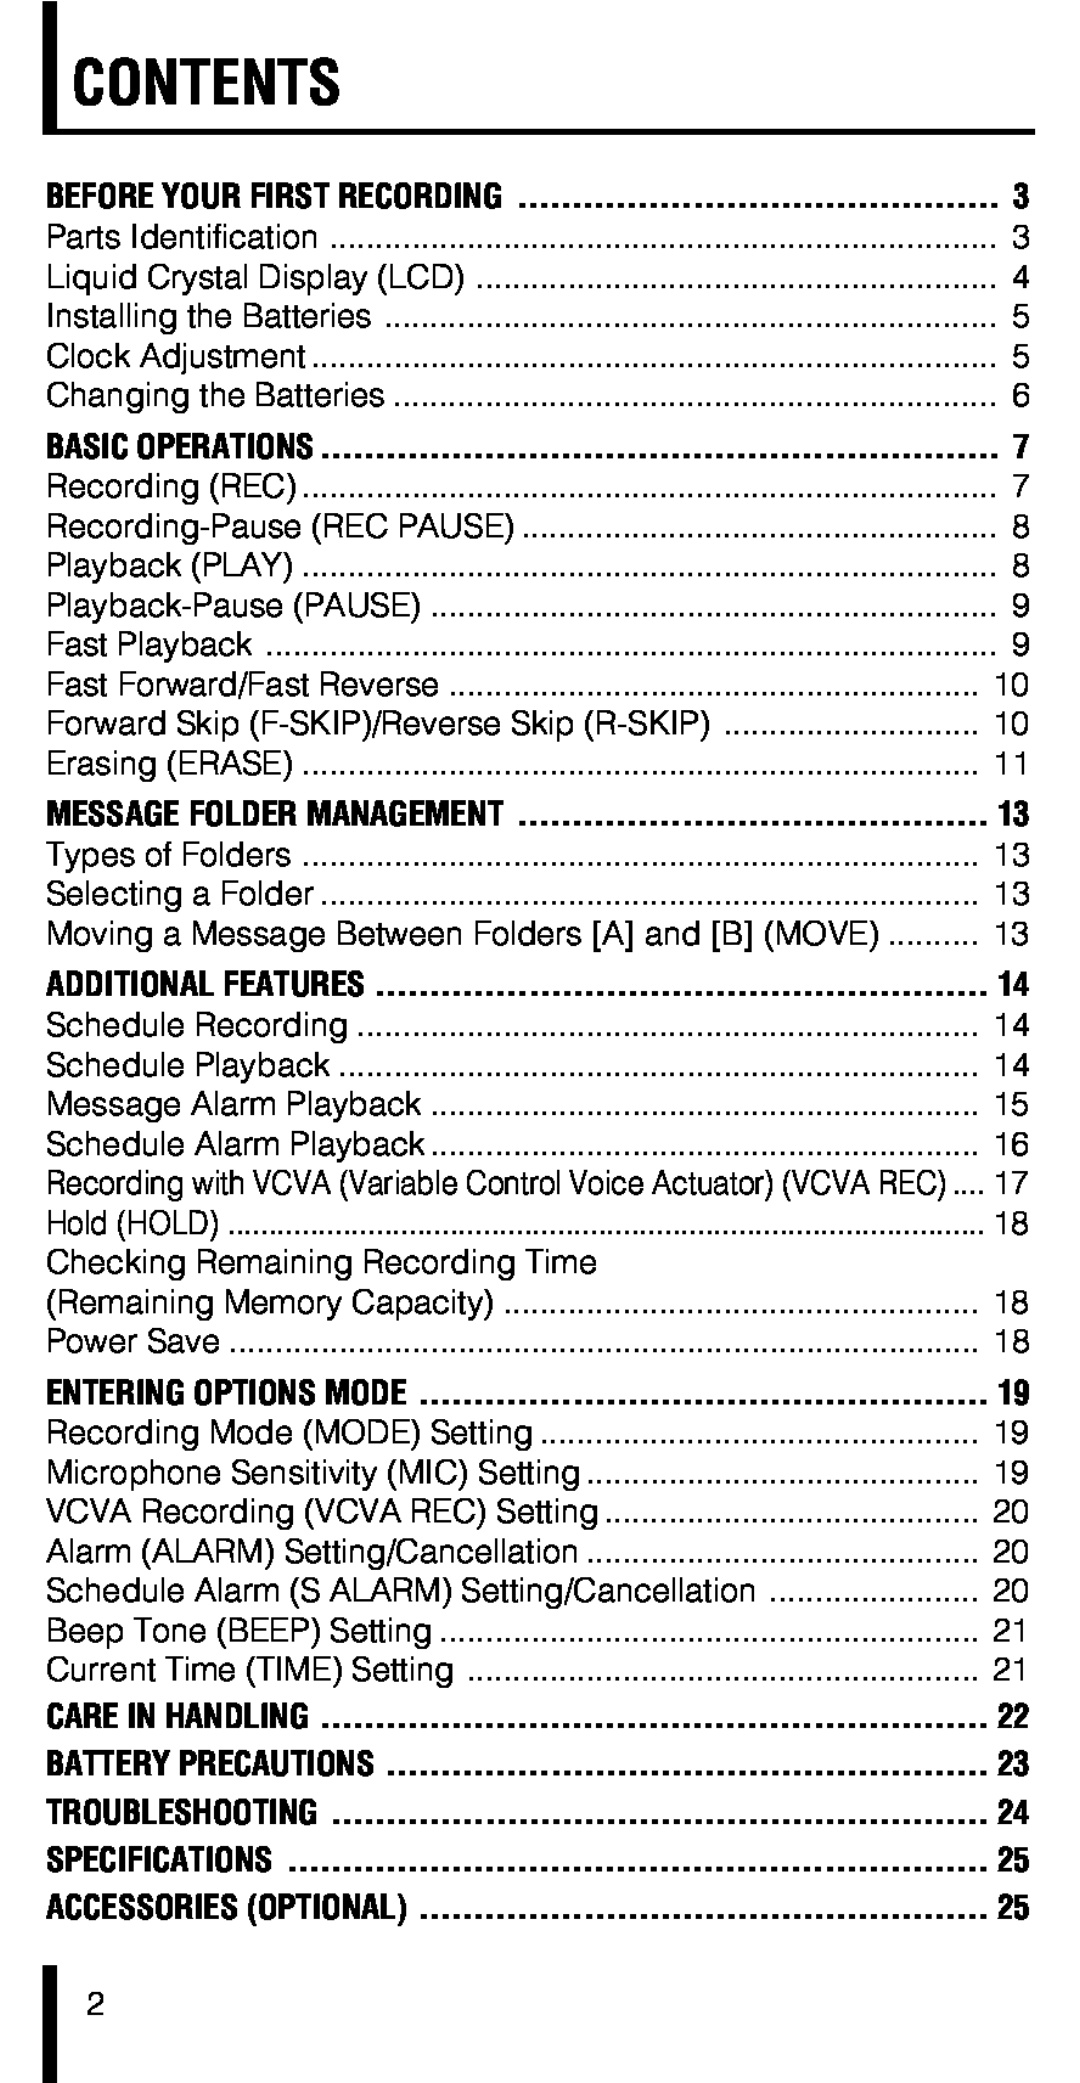 Olympus VN-180 manual Contents, Checking Remaining Recording Time 